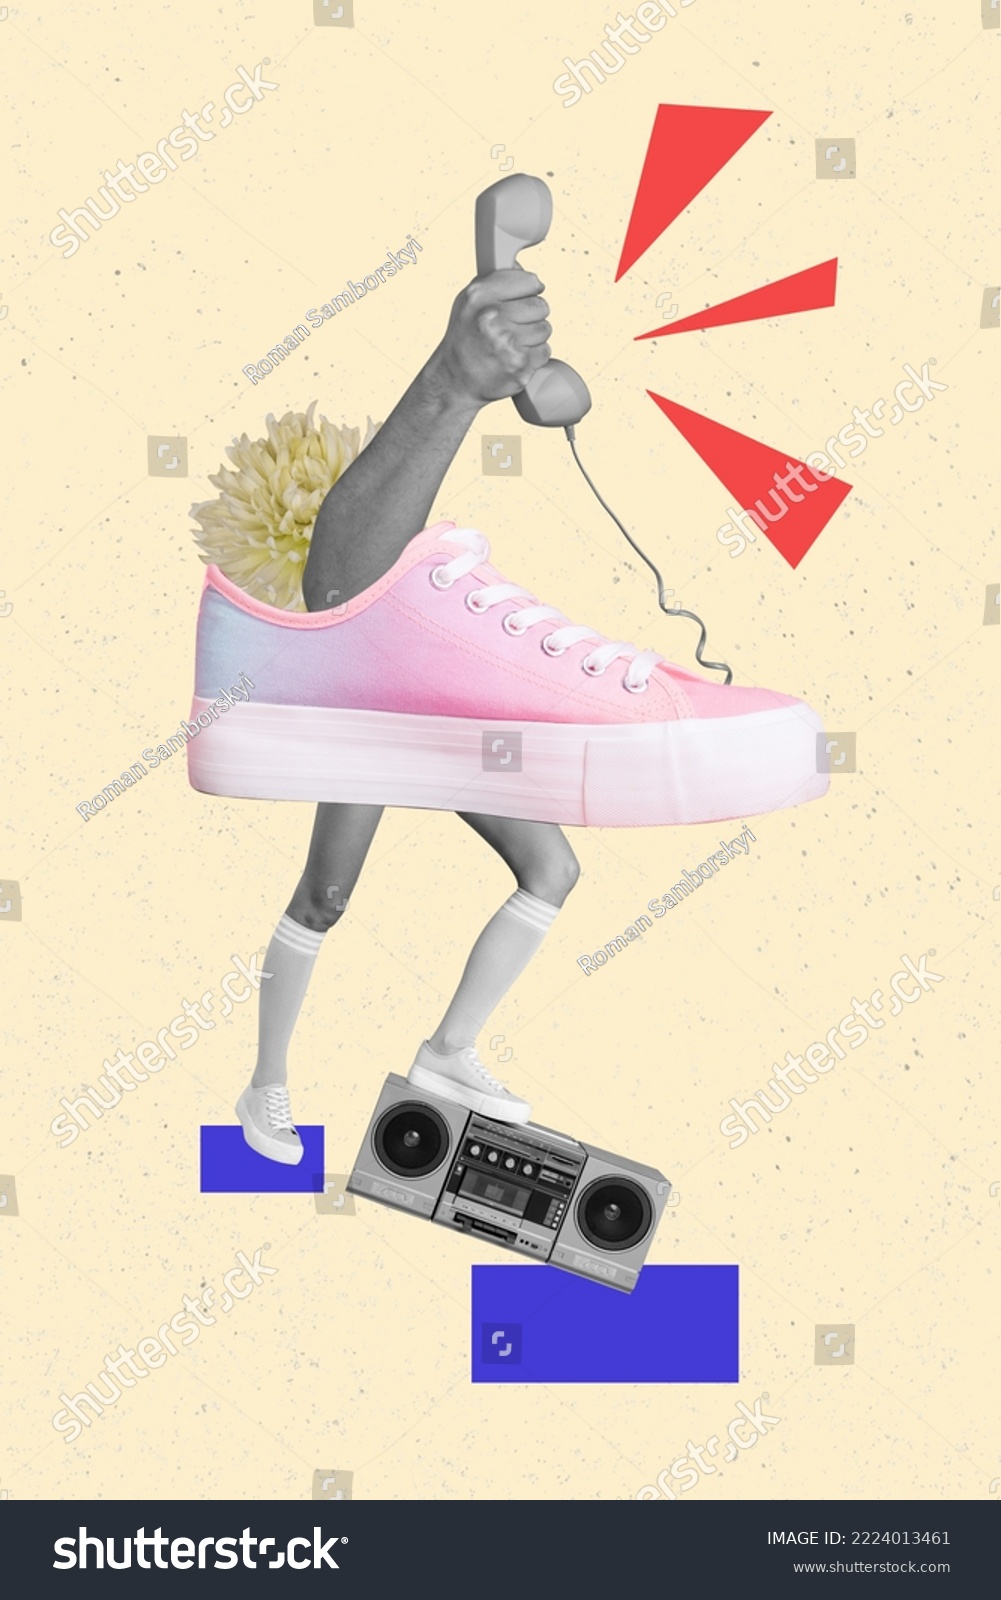 Creative photo 3d collage artwork poster postcard of human hand inside shoes hold telephone phone device isolated on painting background #2224013461